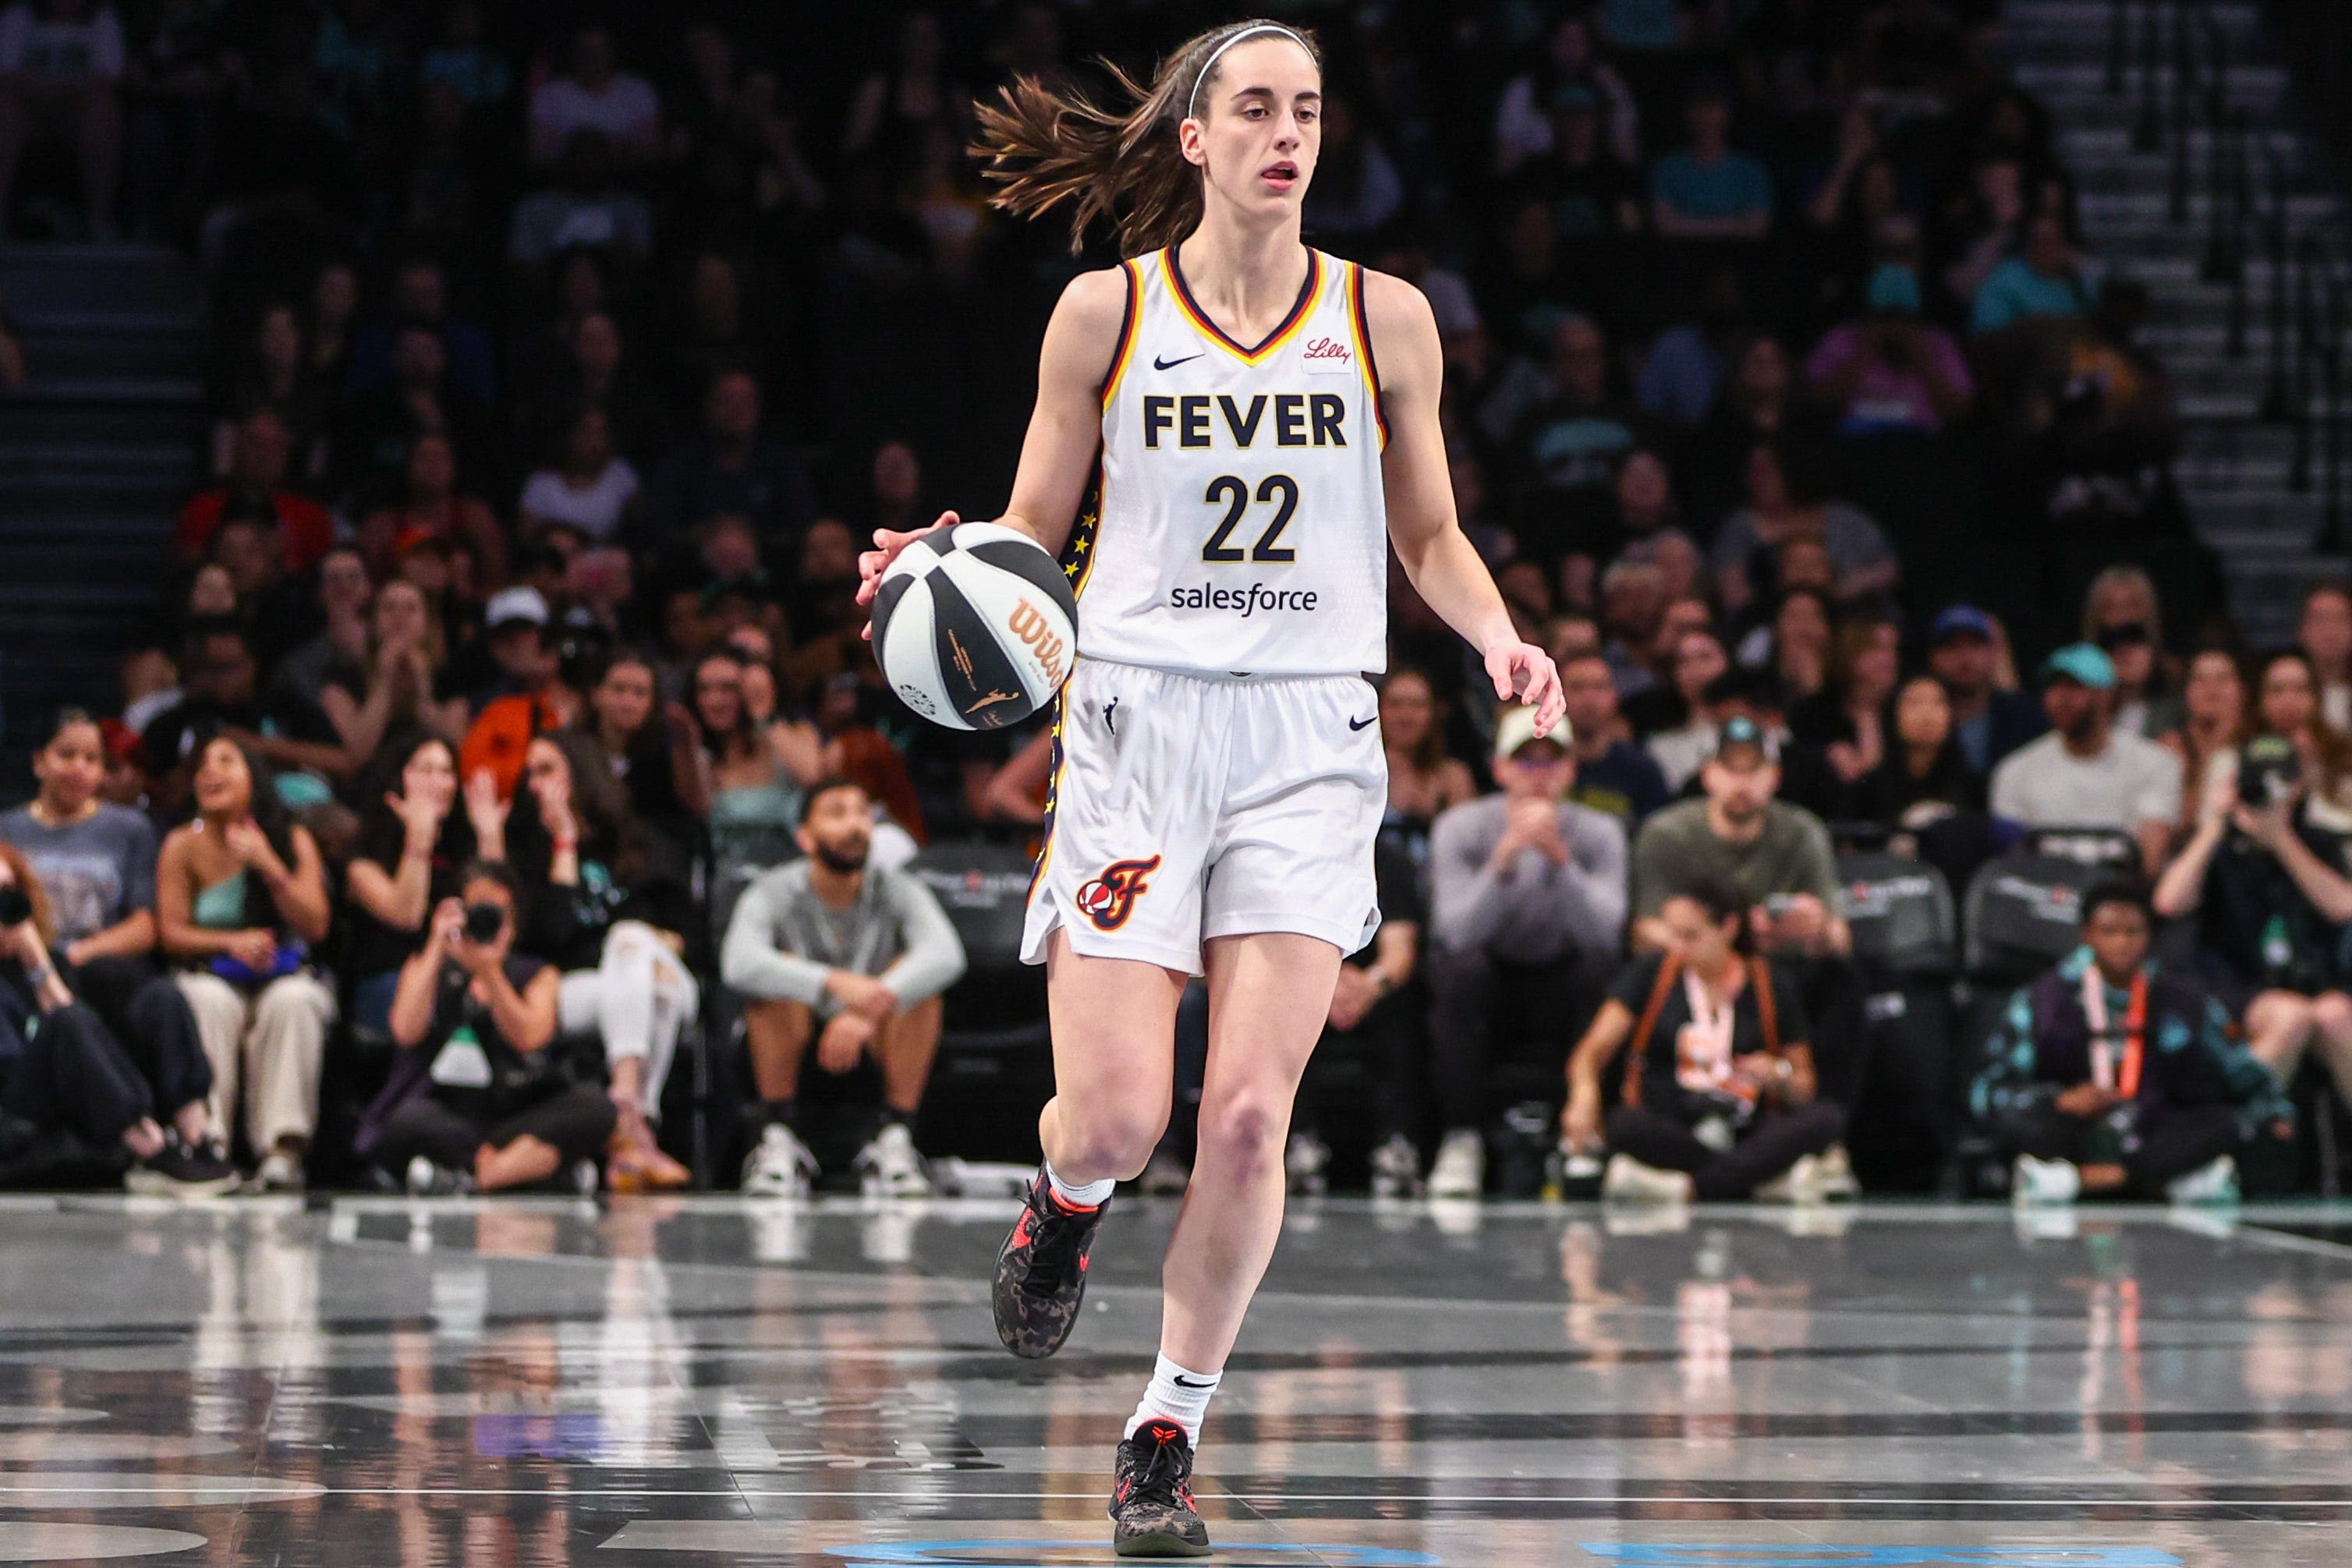 Caitlin Clark gives honest take on start to WNBA career: 'That's just the learning curve'